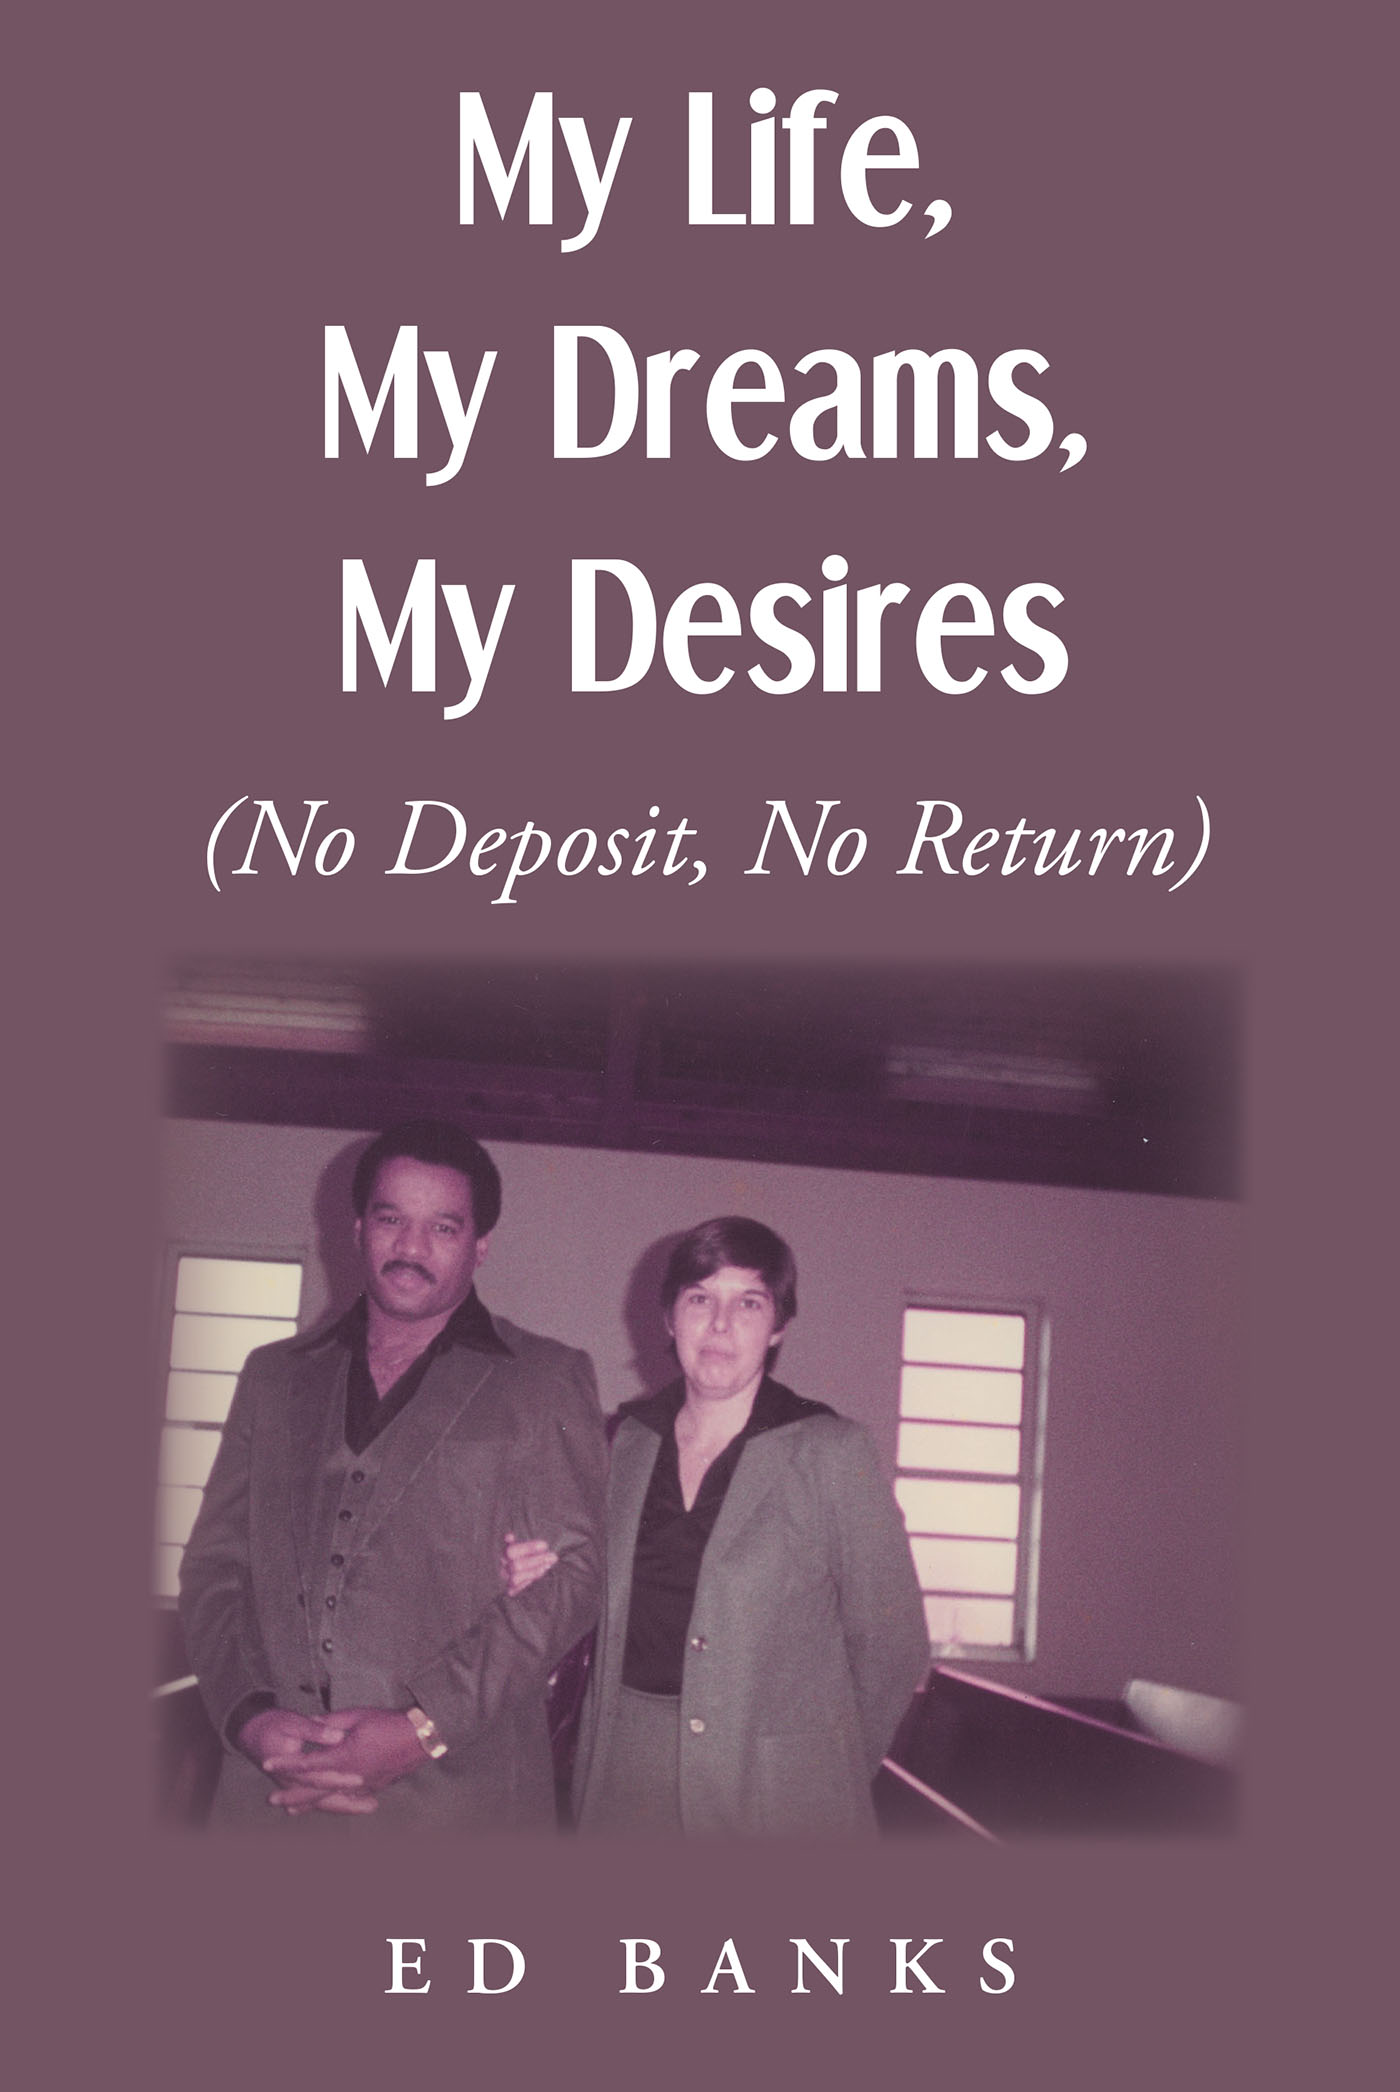 Ed Banks’s Newly Released "My Life, My Dreams, My Desires: No Deposit, No Return" is an Enjoyable Memoir That Offers Insight and Wisdom on Building a Life of Success